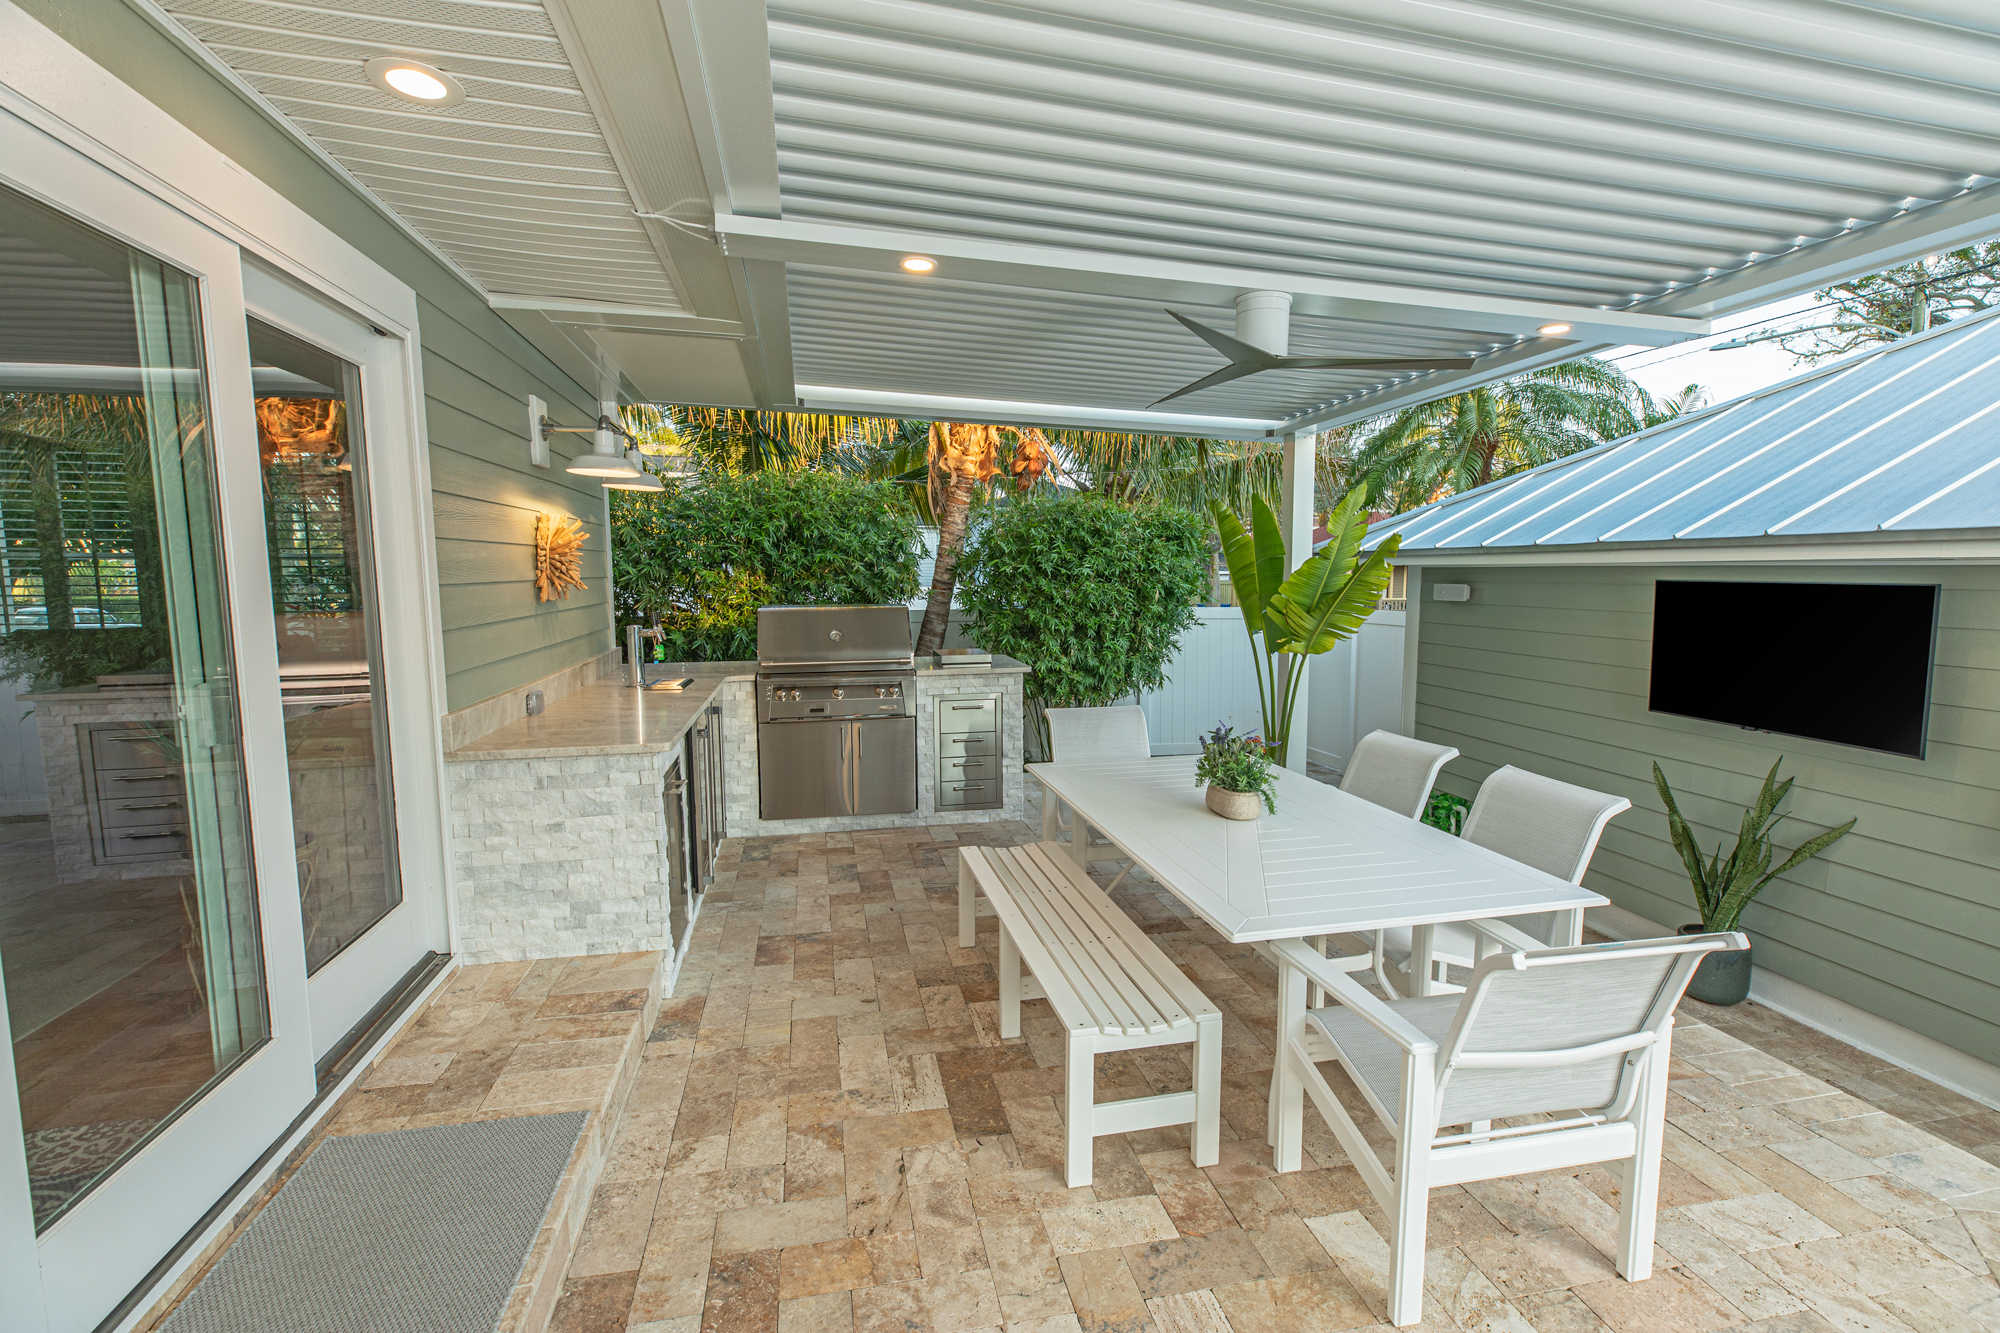 Custom Stone Outdoor Kitchen With Gas Grill Fridge and Keg St Petersburg Florida WEB